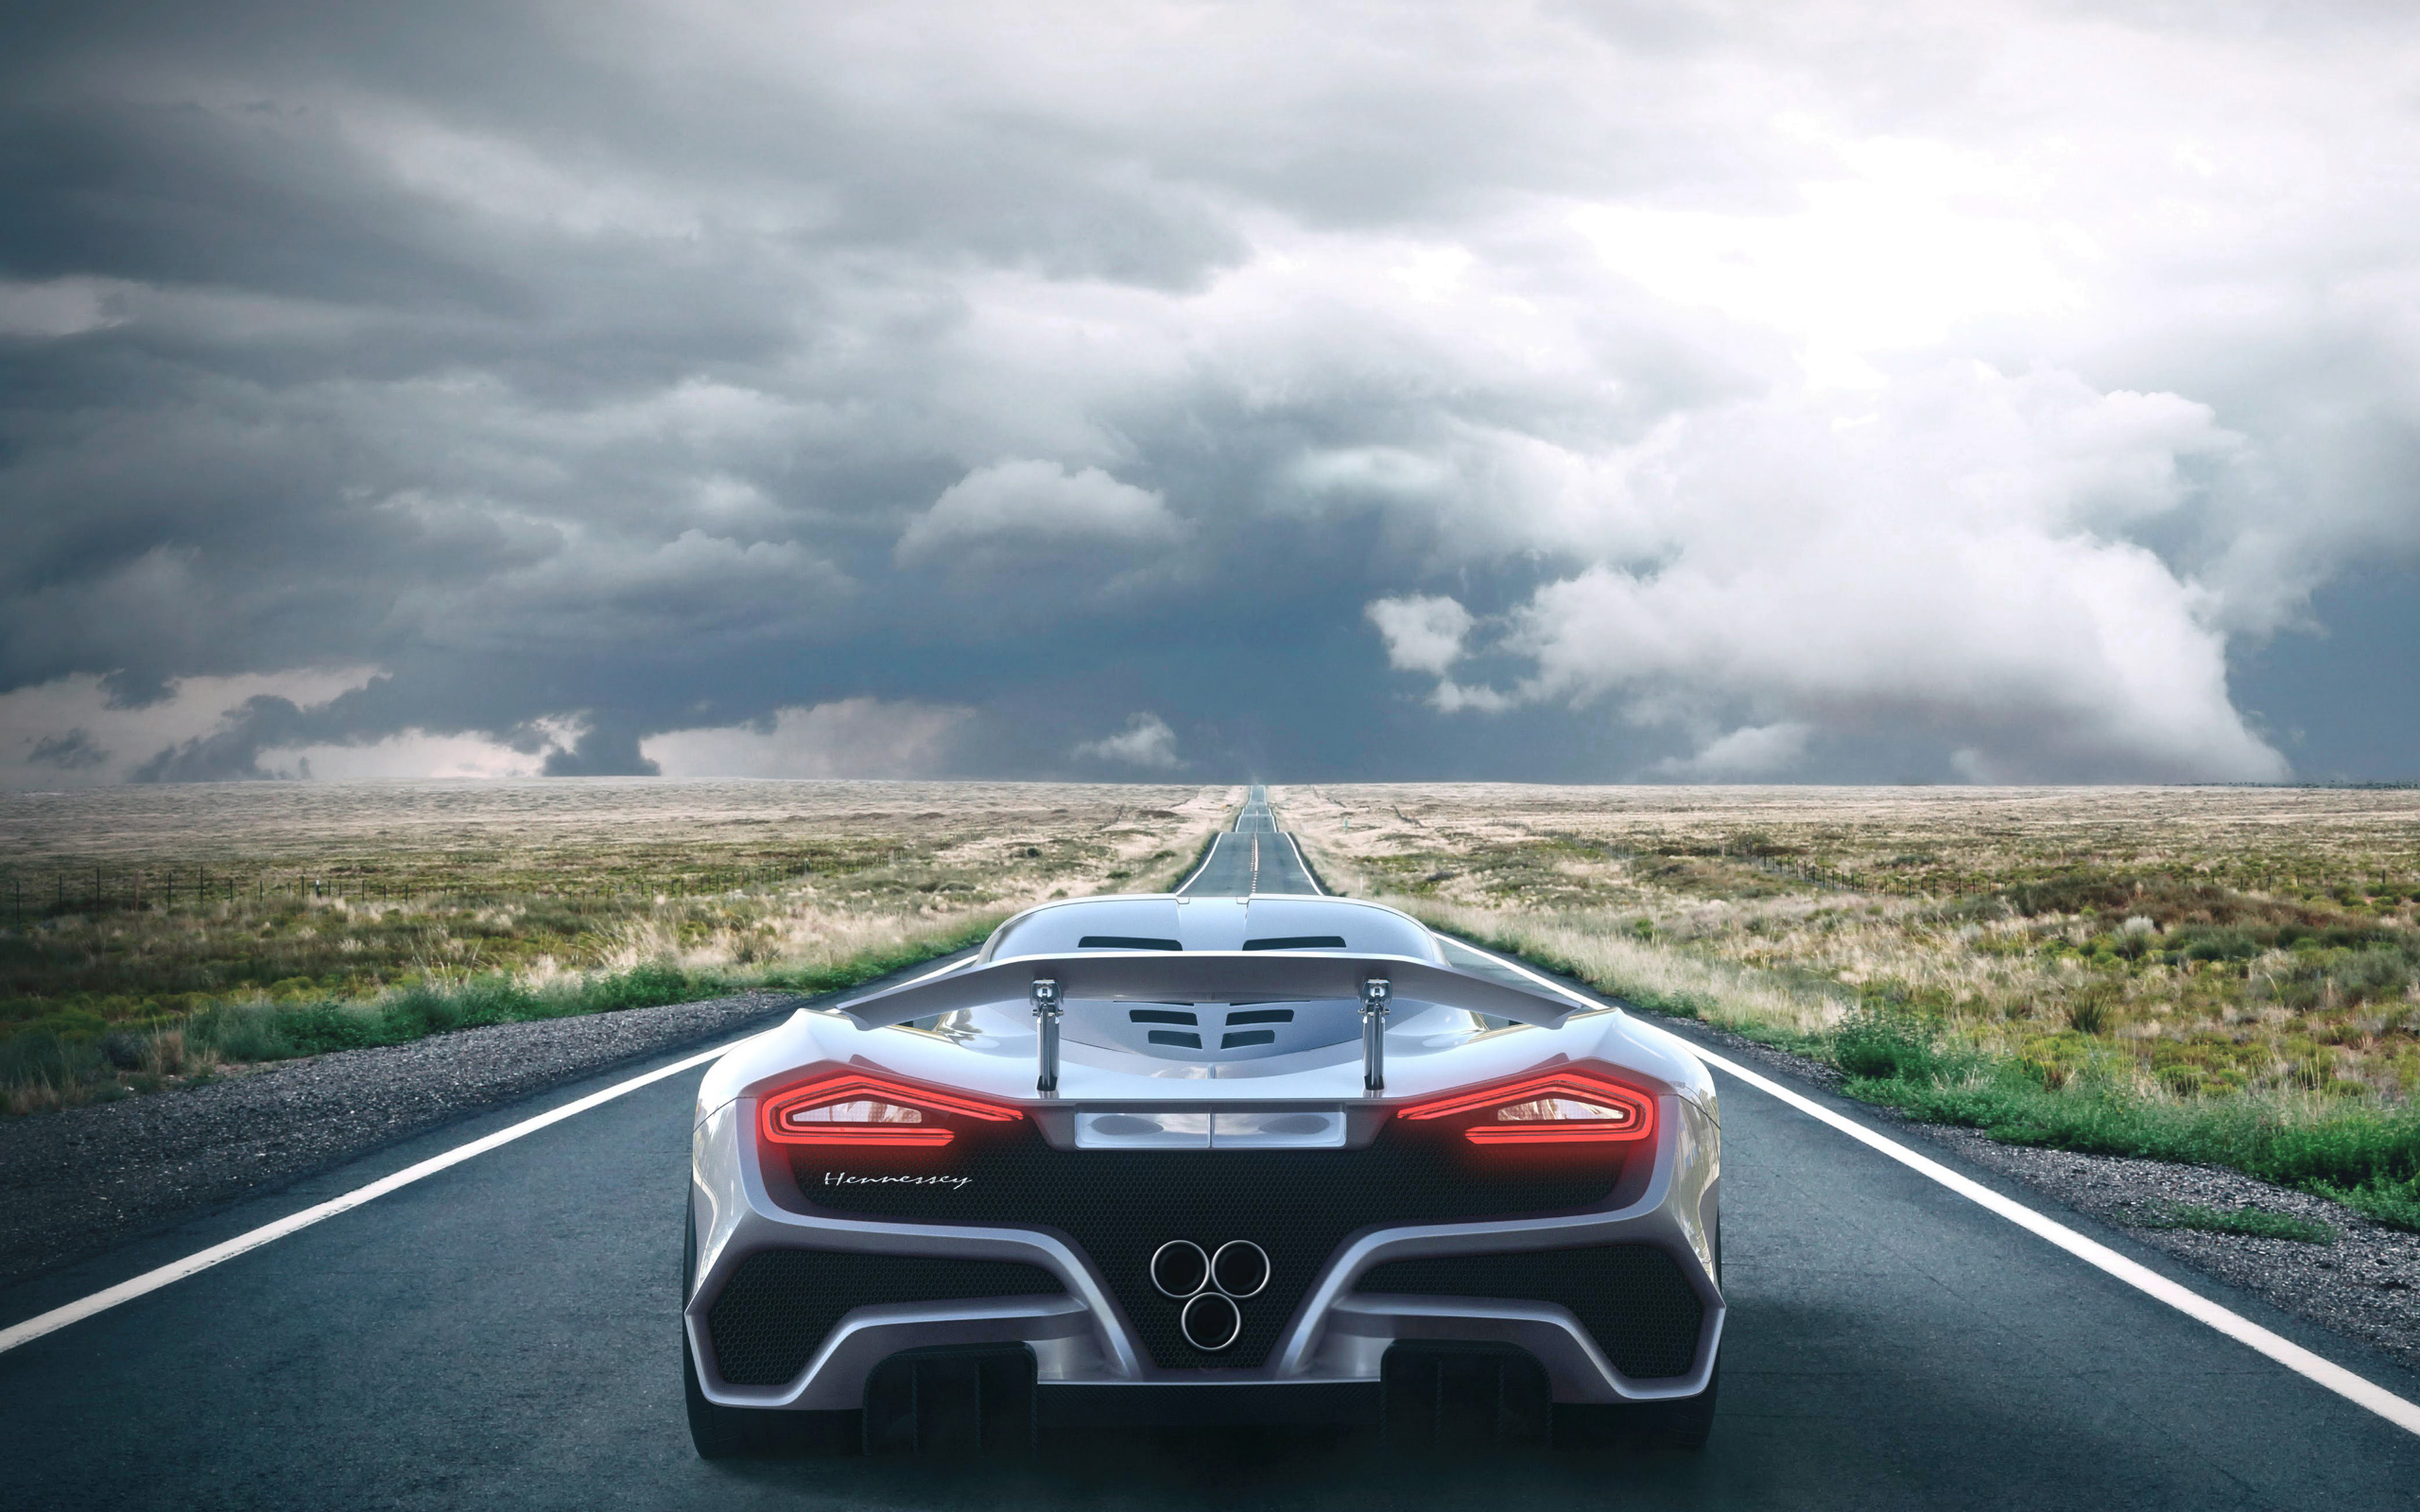 General 2560x1600 car sky road vehicle rear view Hennessey Hennessey Venom F5 Hypercar American cars